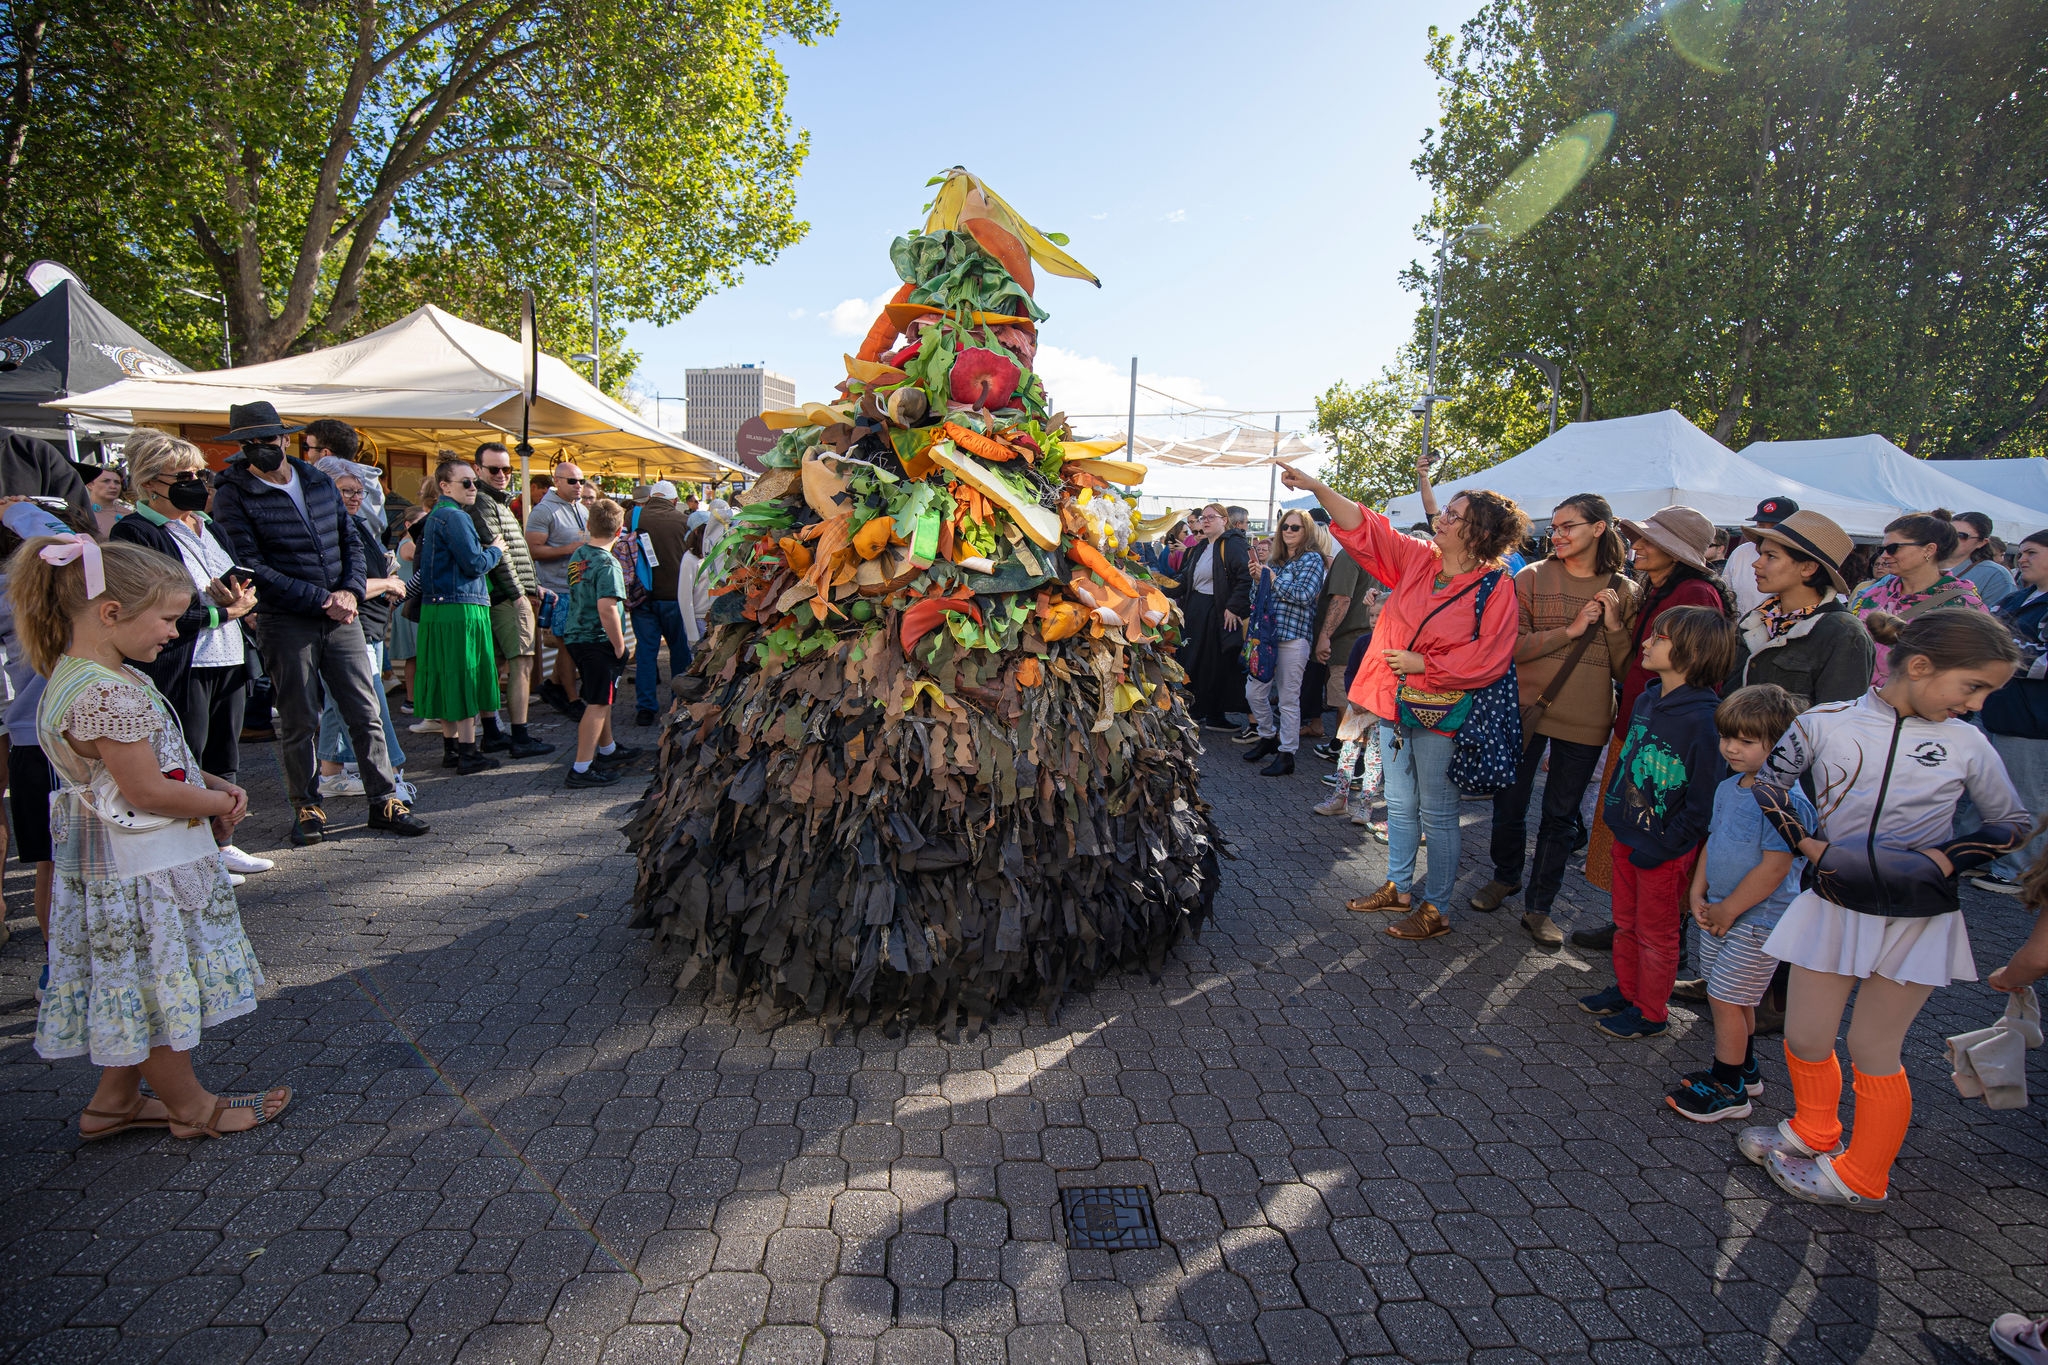 mascot-dressed-in-pile-of-vegetables-costume-performing-for-a-group-of-people